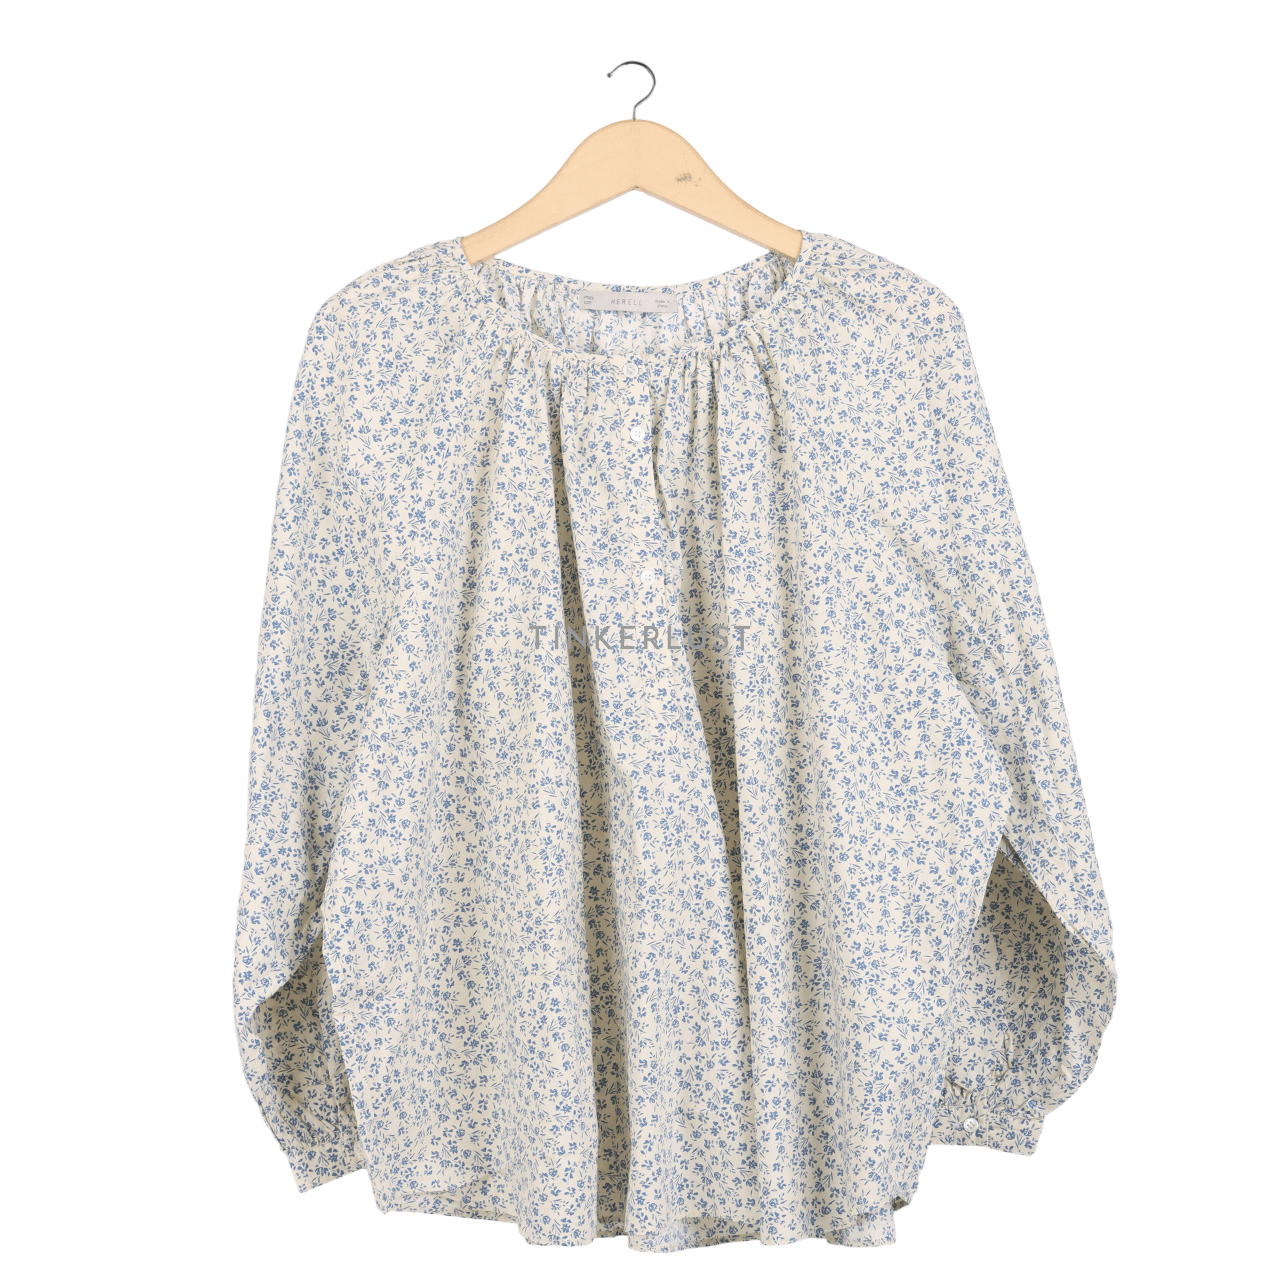 Herell Cream Floral Blouse